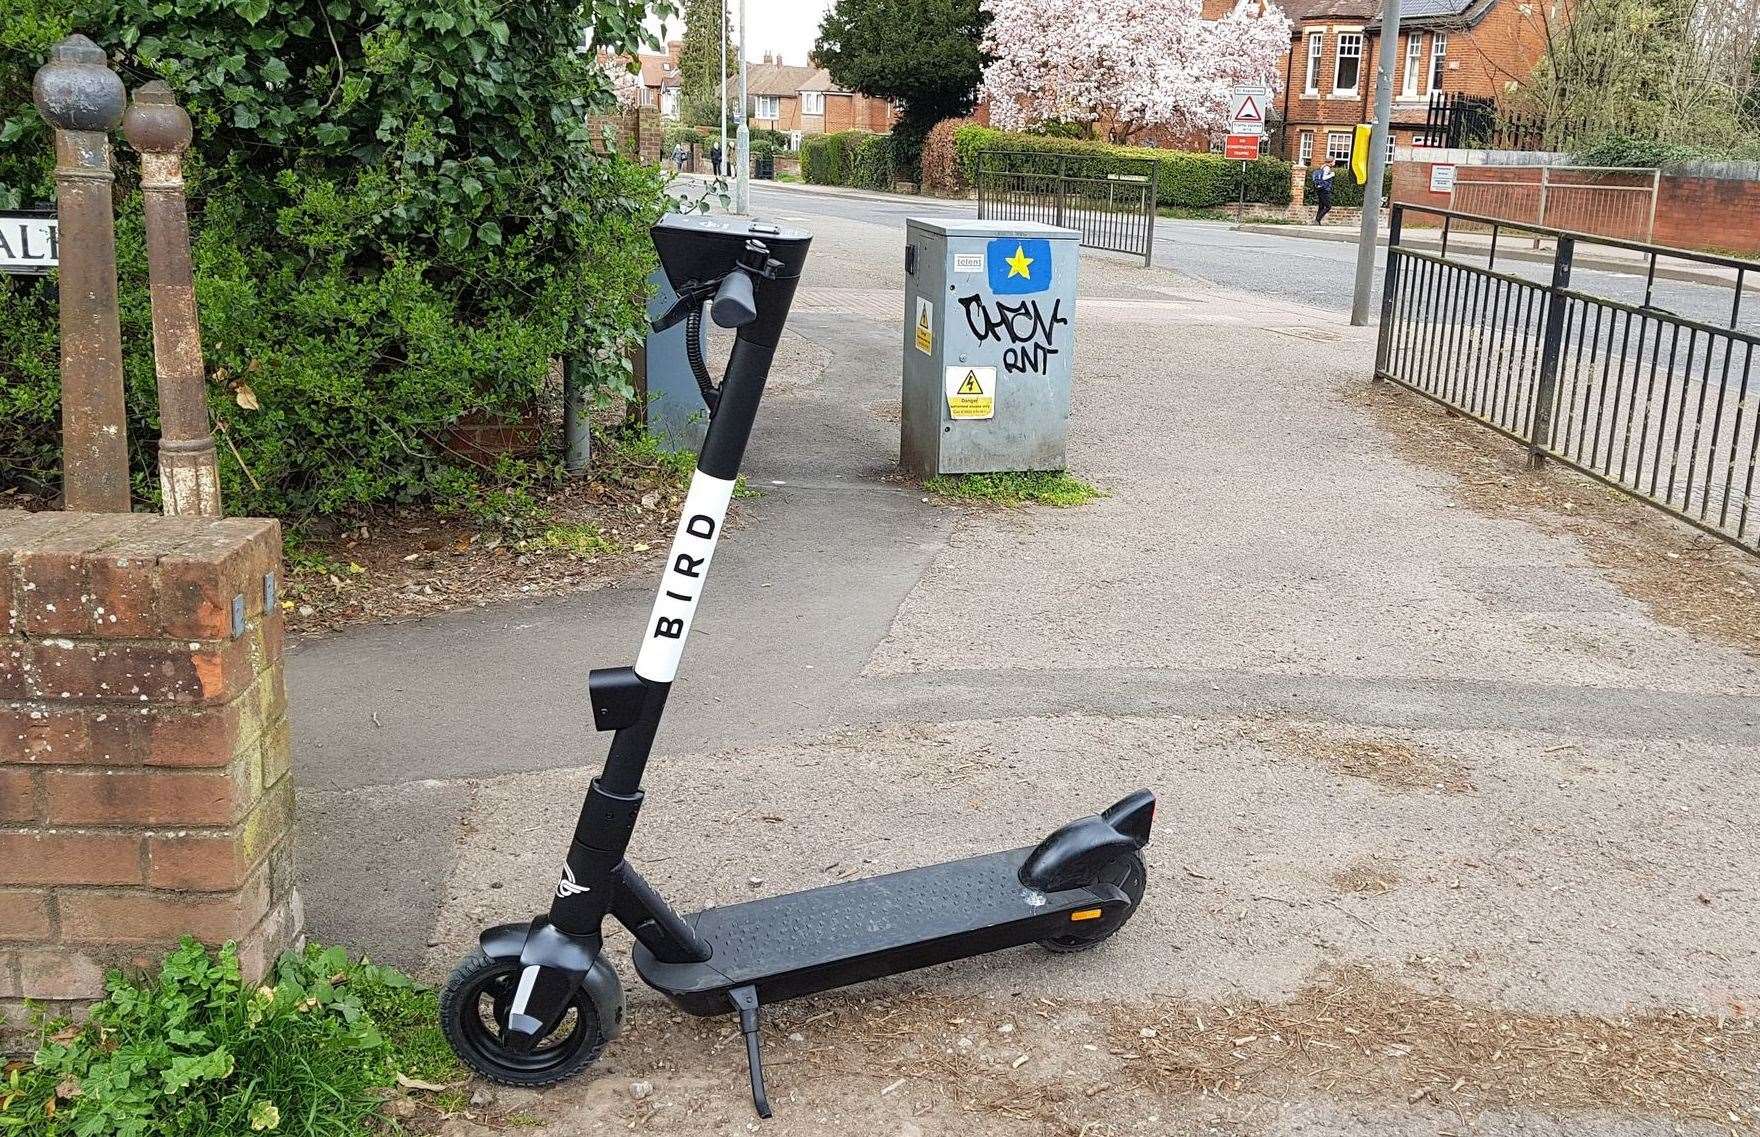 The scooter was dropped off in a designated parking spot in New Dover Road